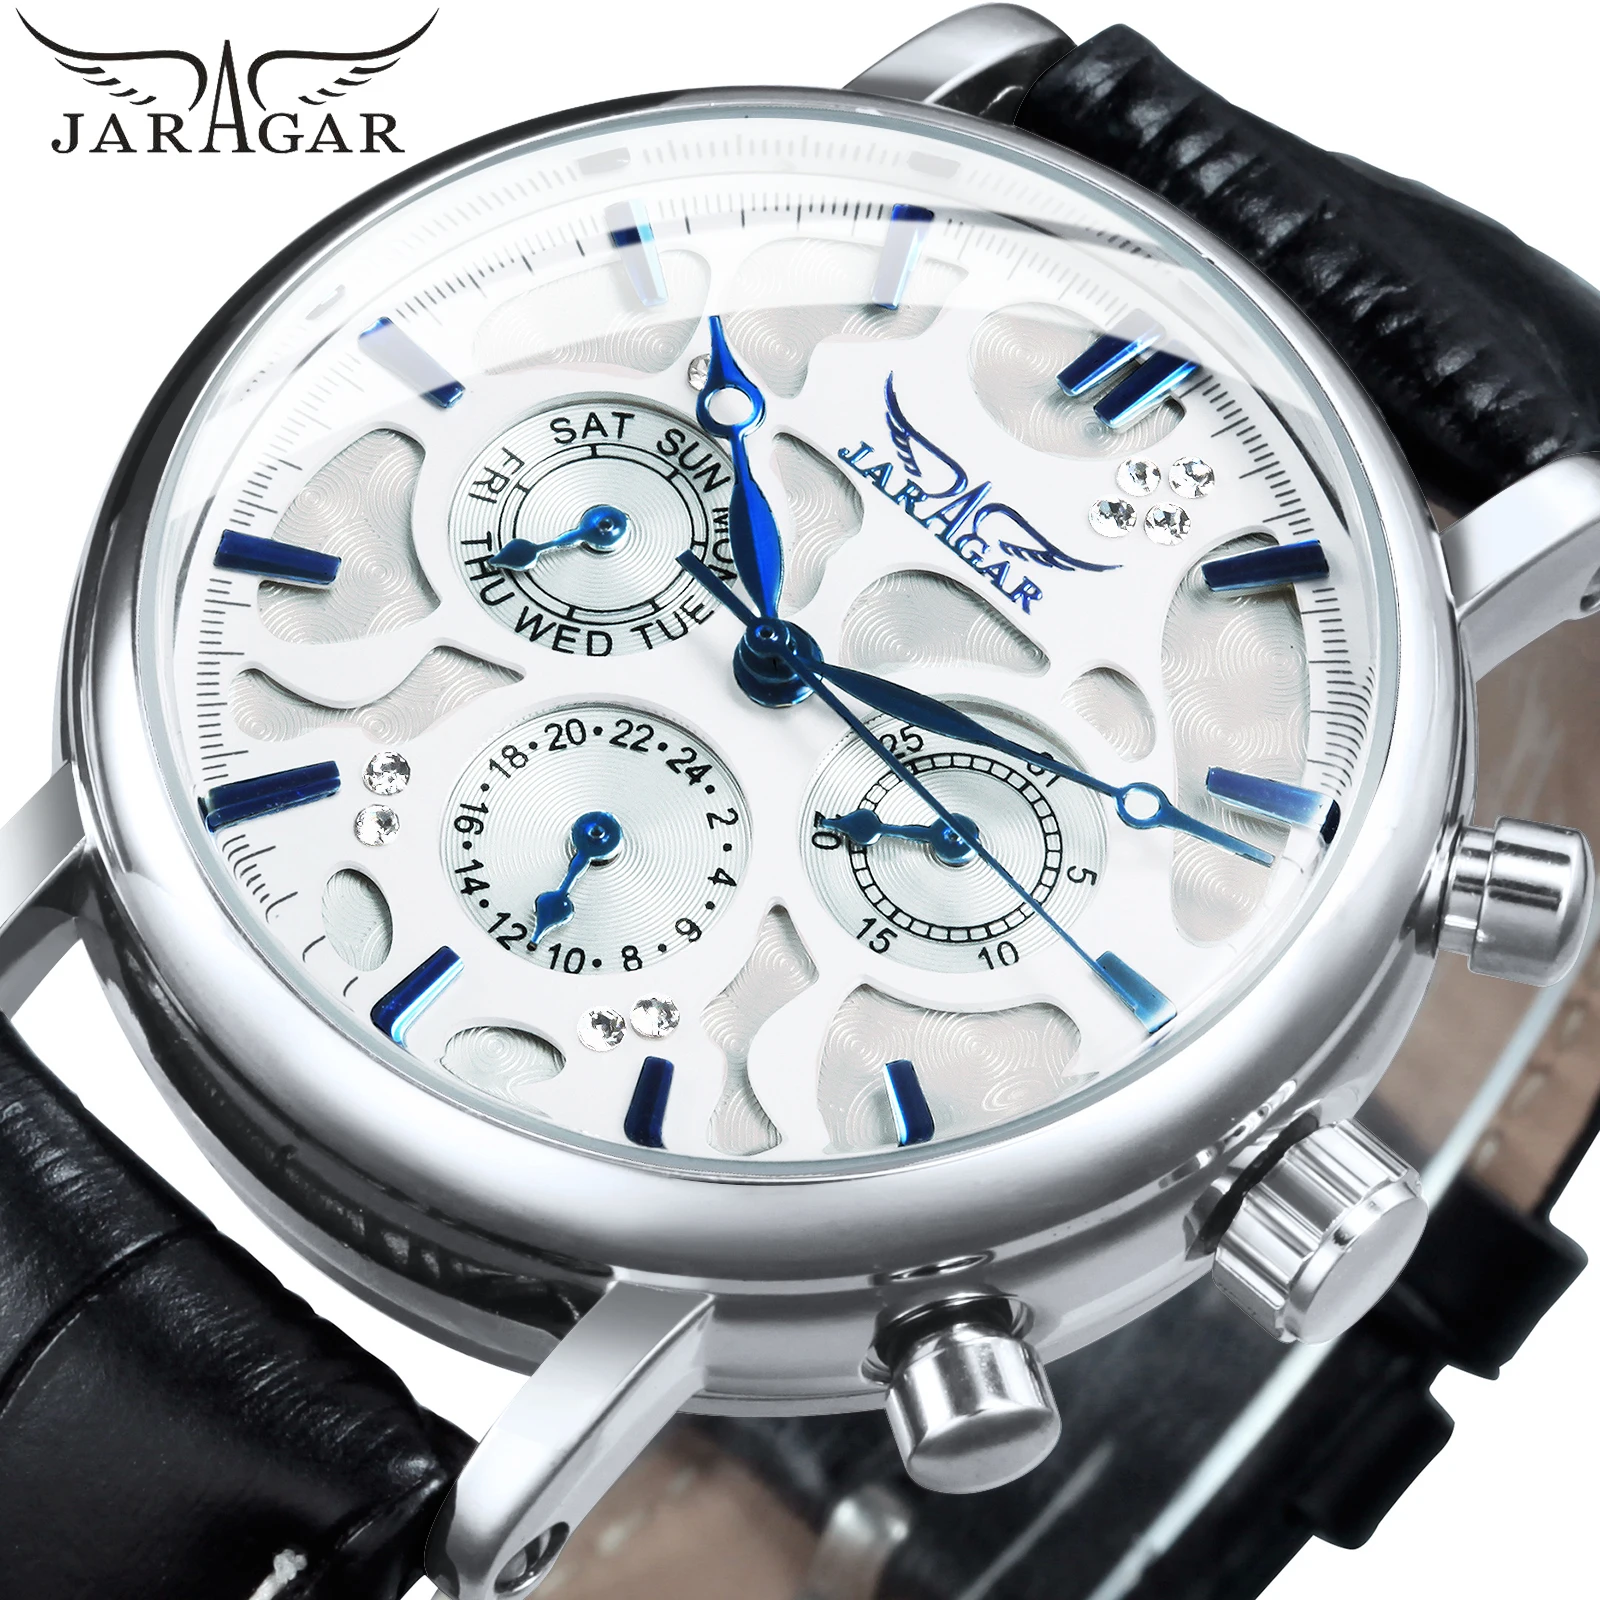 Fashion Jaragar Top Brand Pilot Mens Mechanical Date Display Blue Pointers Automatic Watch Men Luxury Leather Strap Wristwatches